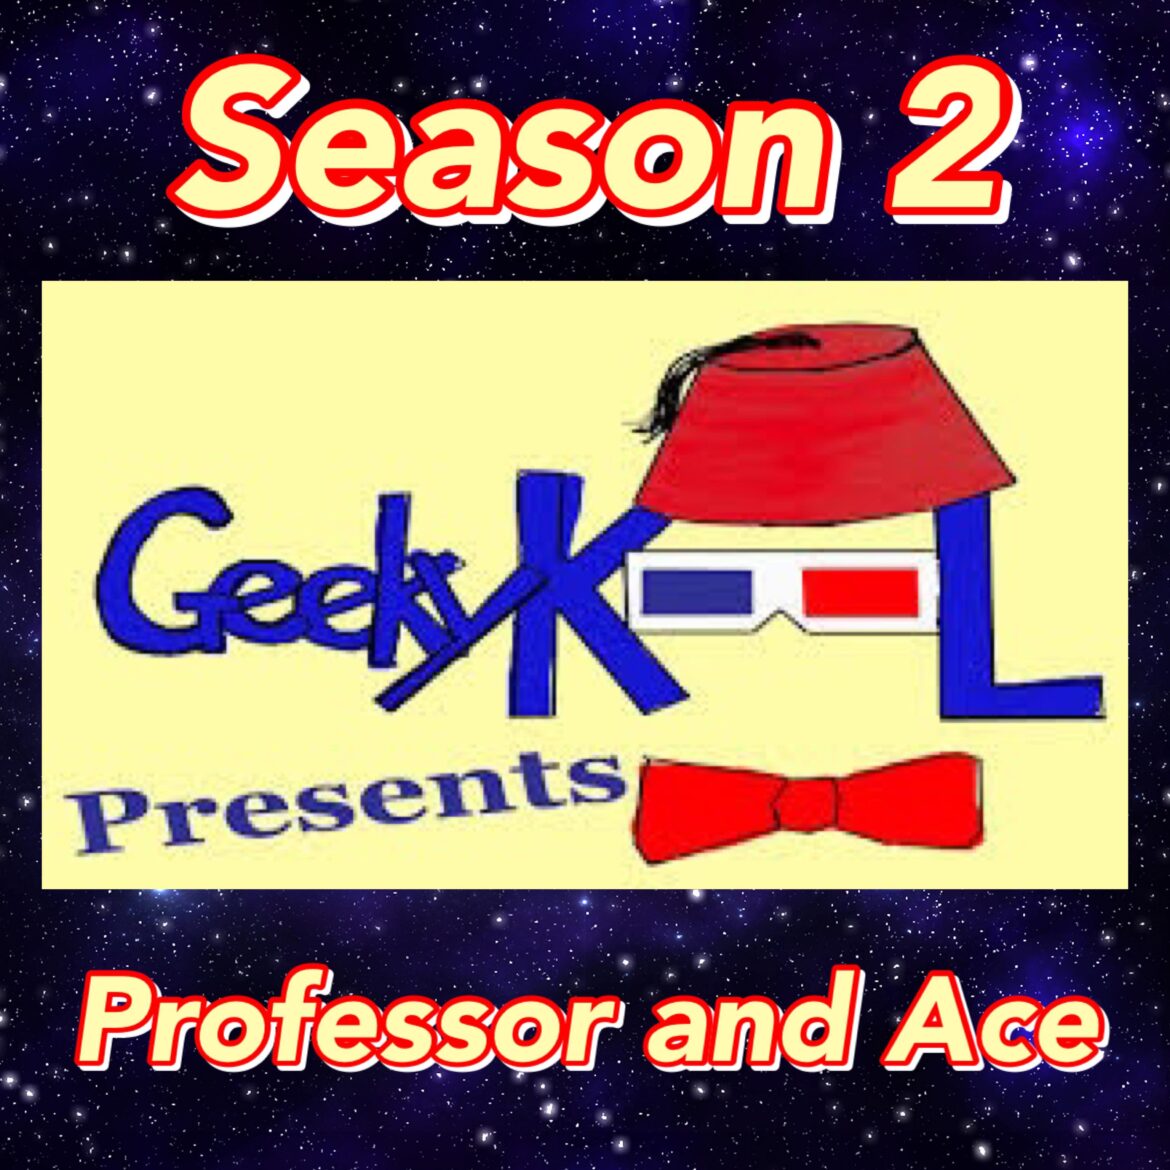 Special Edition of Geeky KOOL Presents on Tonight